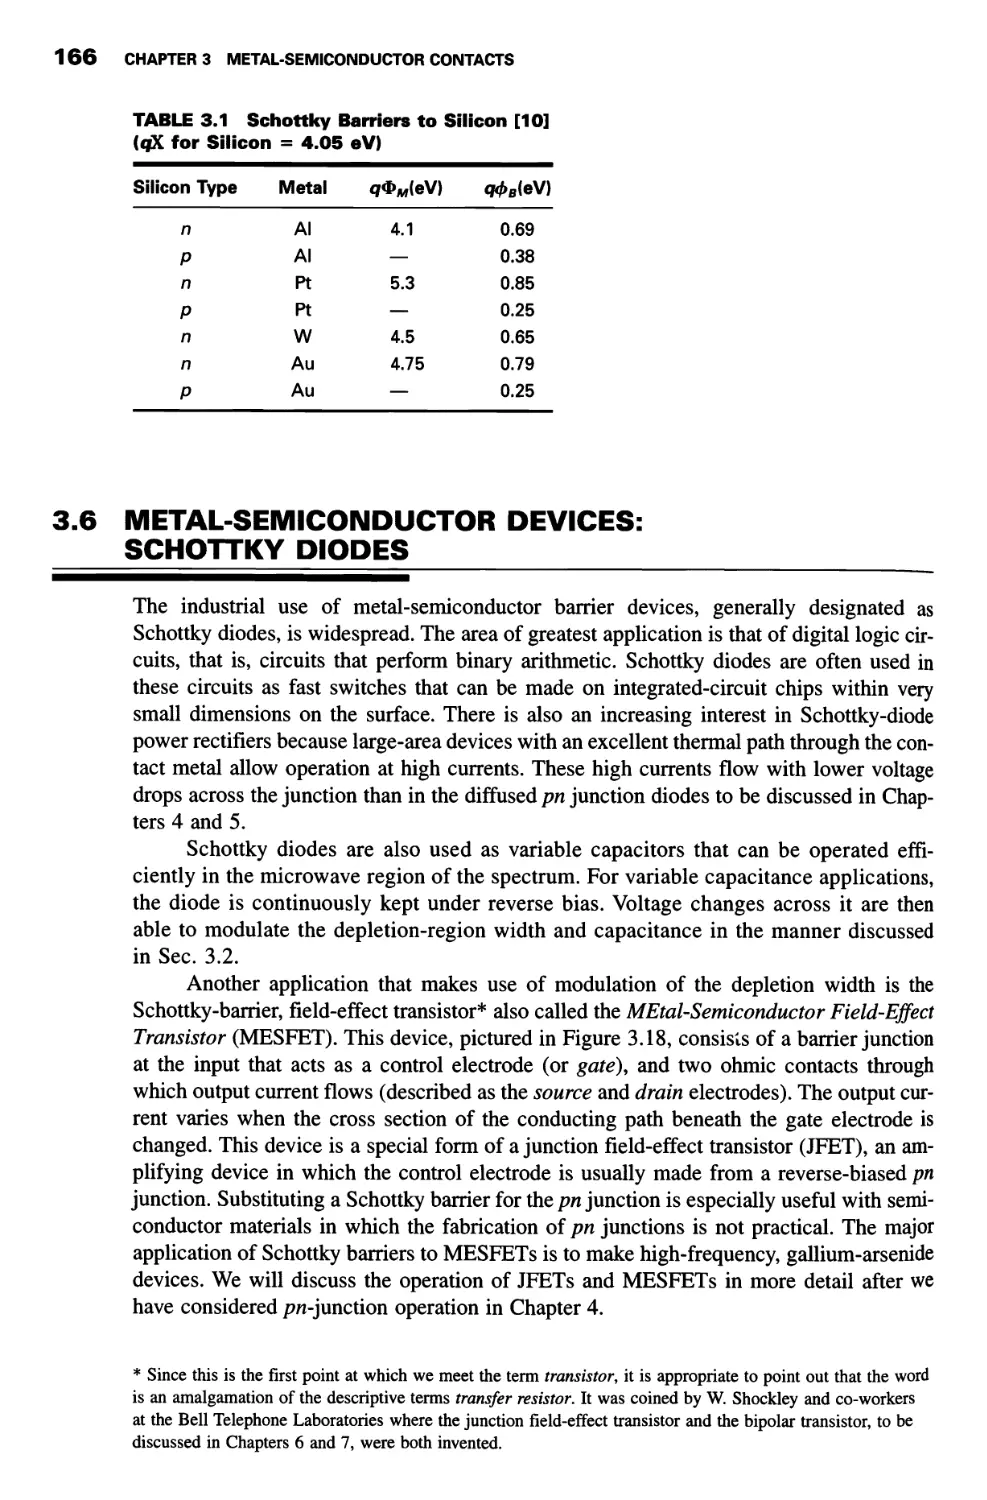 3.6 Metal-Semiconductor Devices: Schottky Diodes